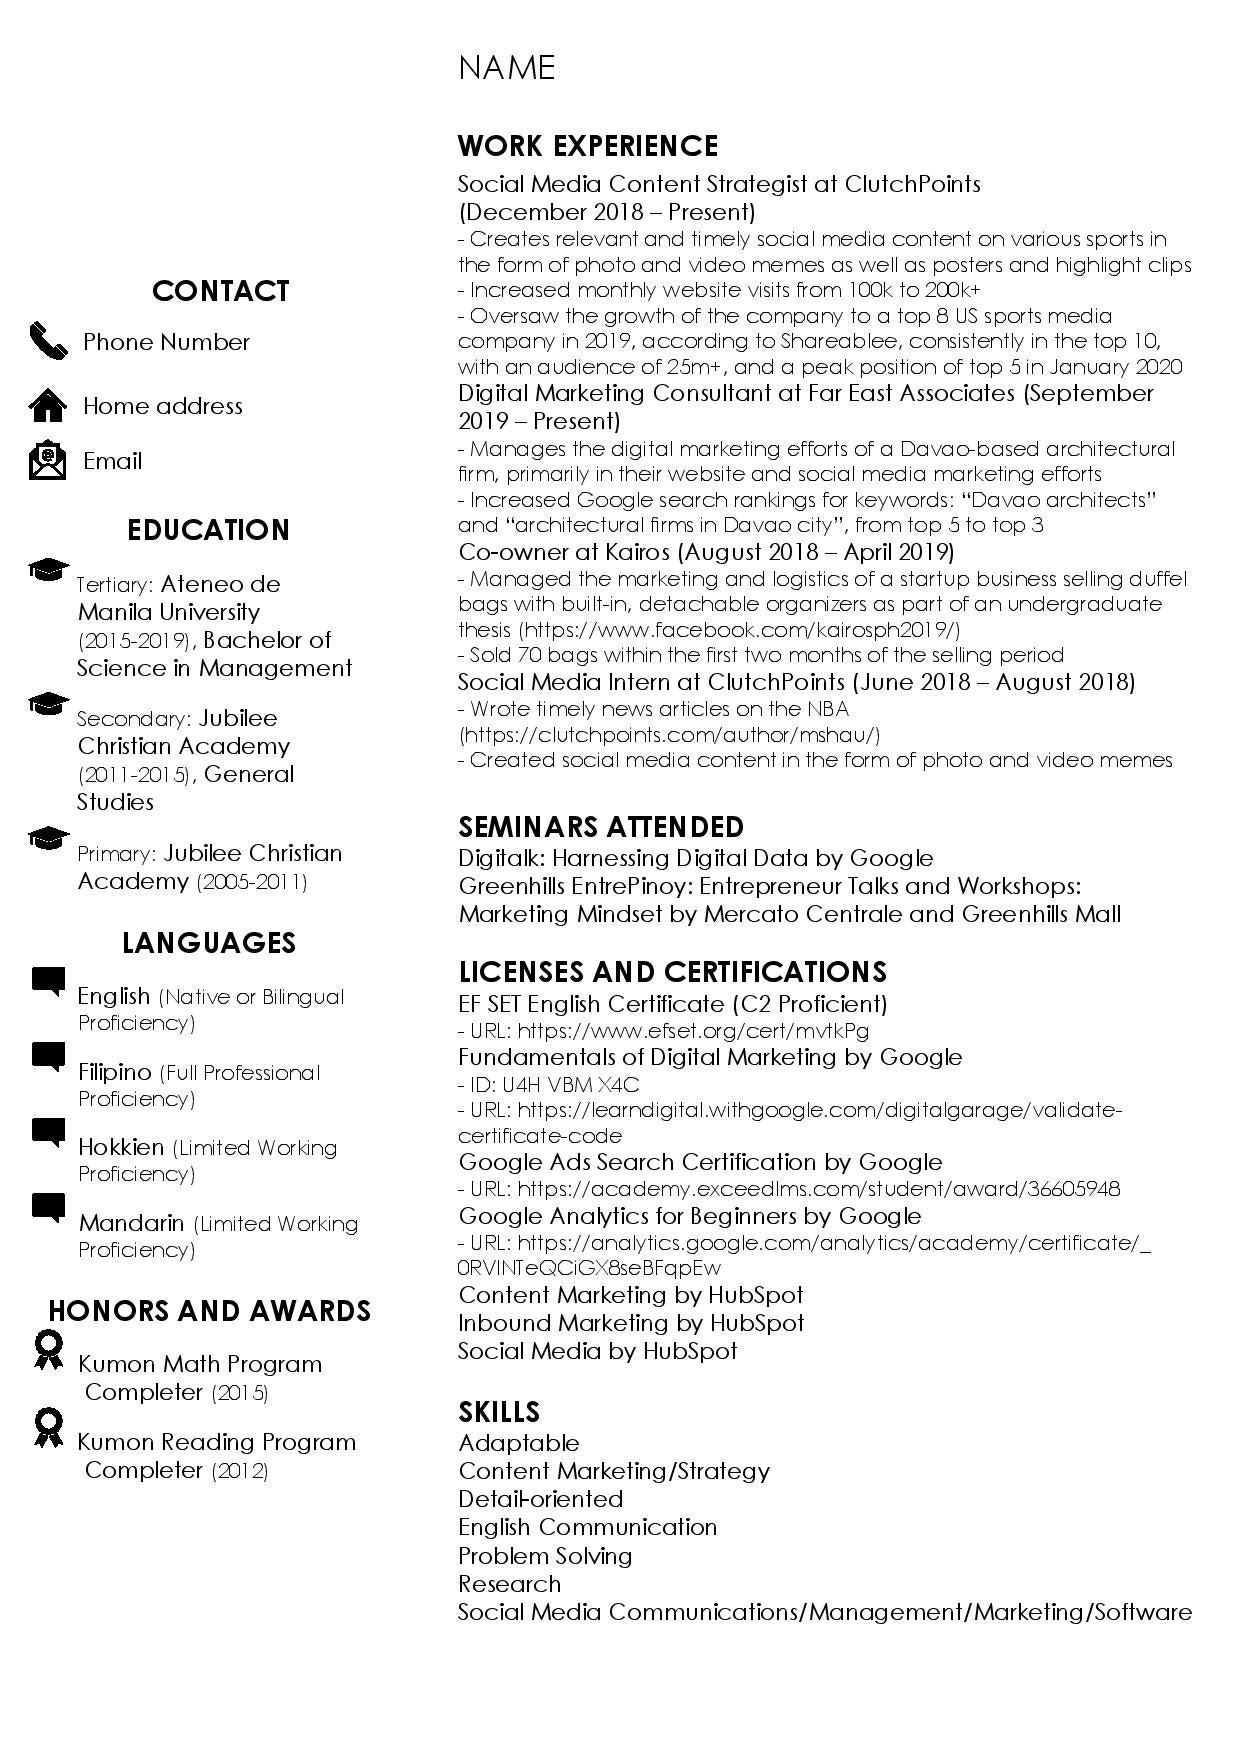 Sample Resume with One Company Multiple Positions Listing Multiple Positions In A Company : R/resumes